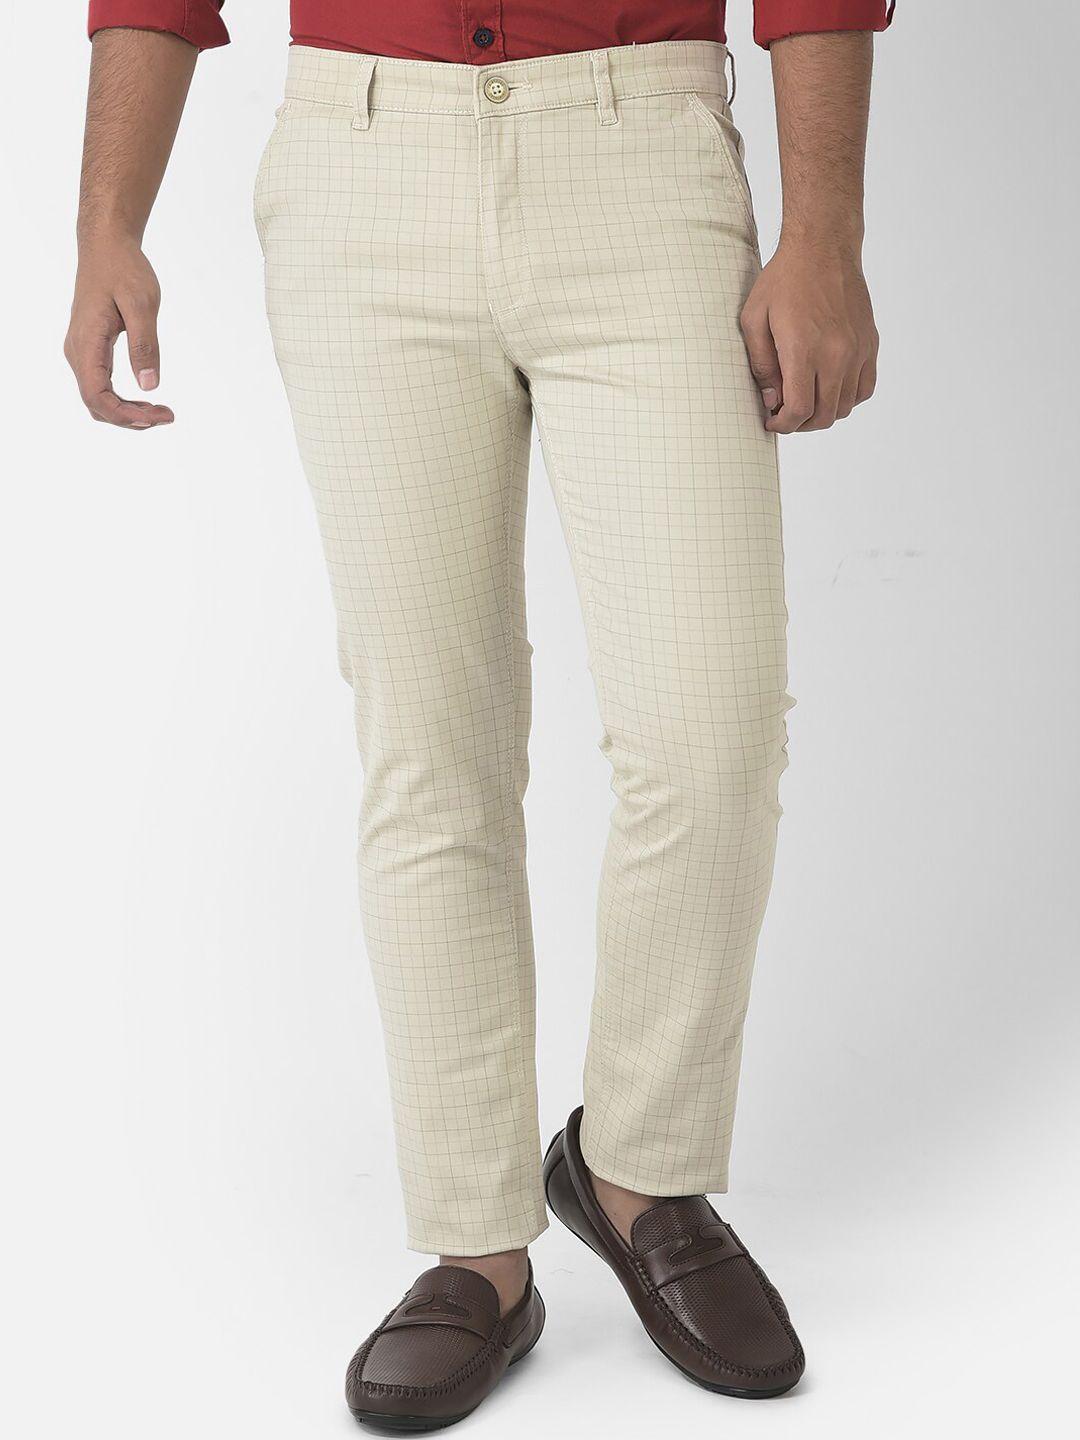 Crimsoune Club Boys Checked Relaxed Cotton Chinos Trousers